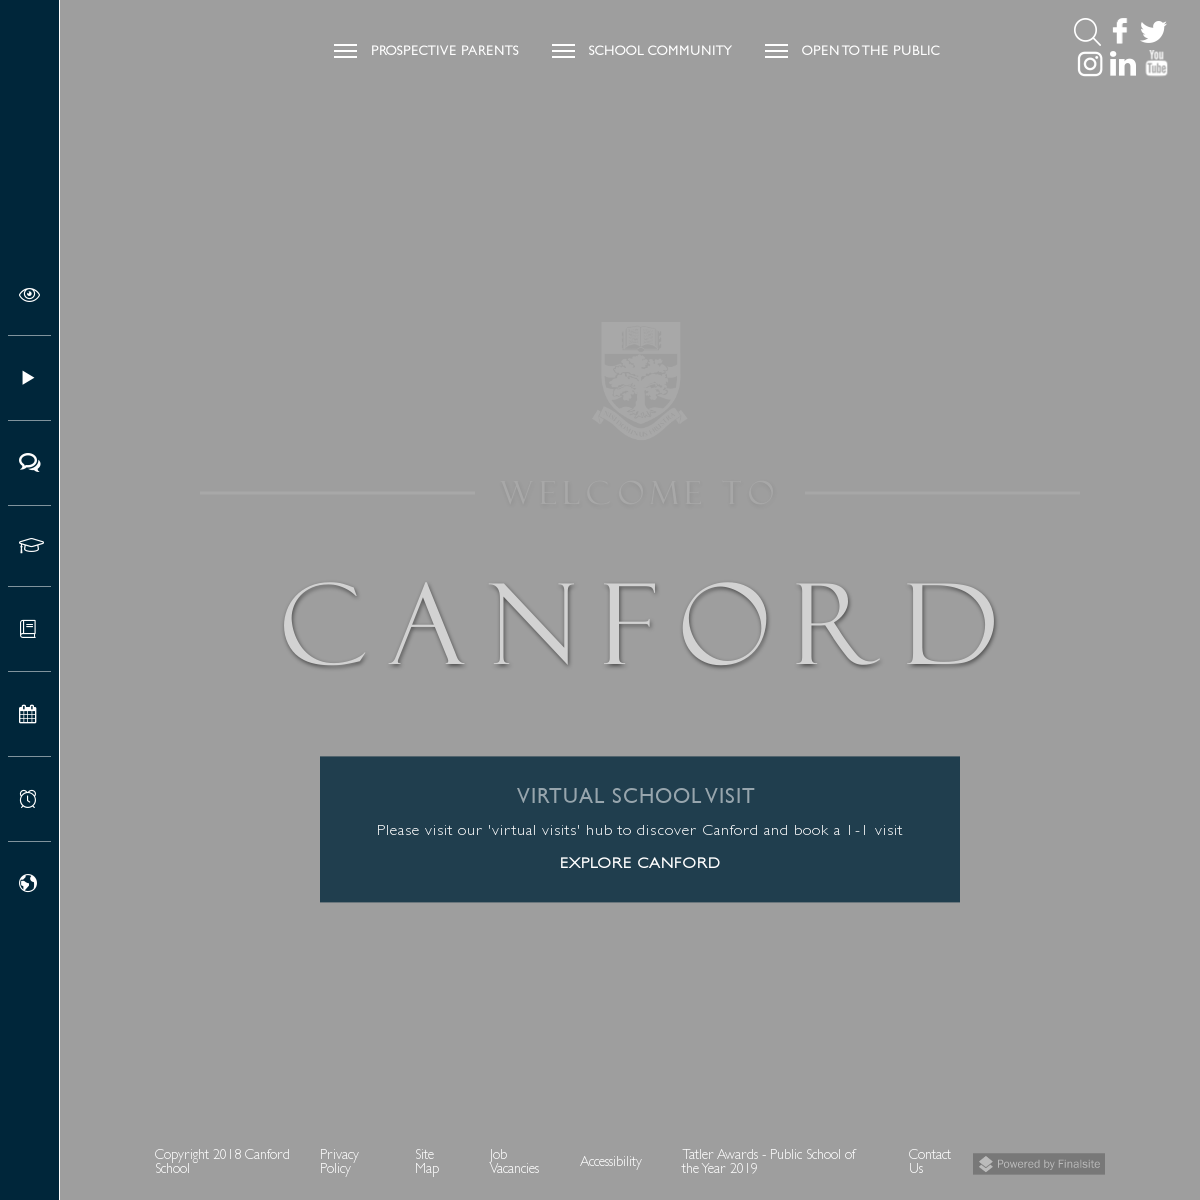 A complete backup of canford.com